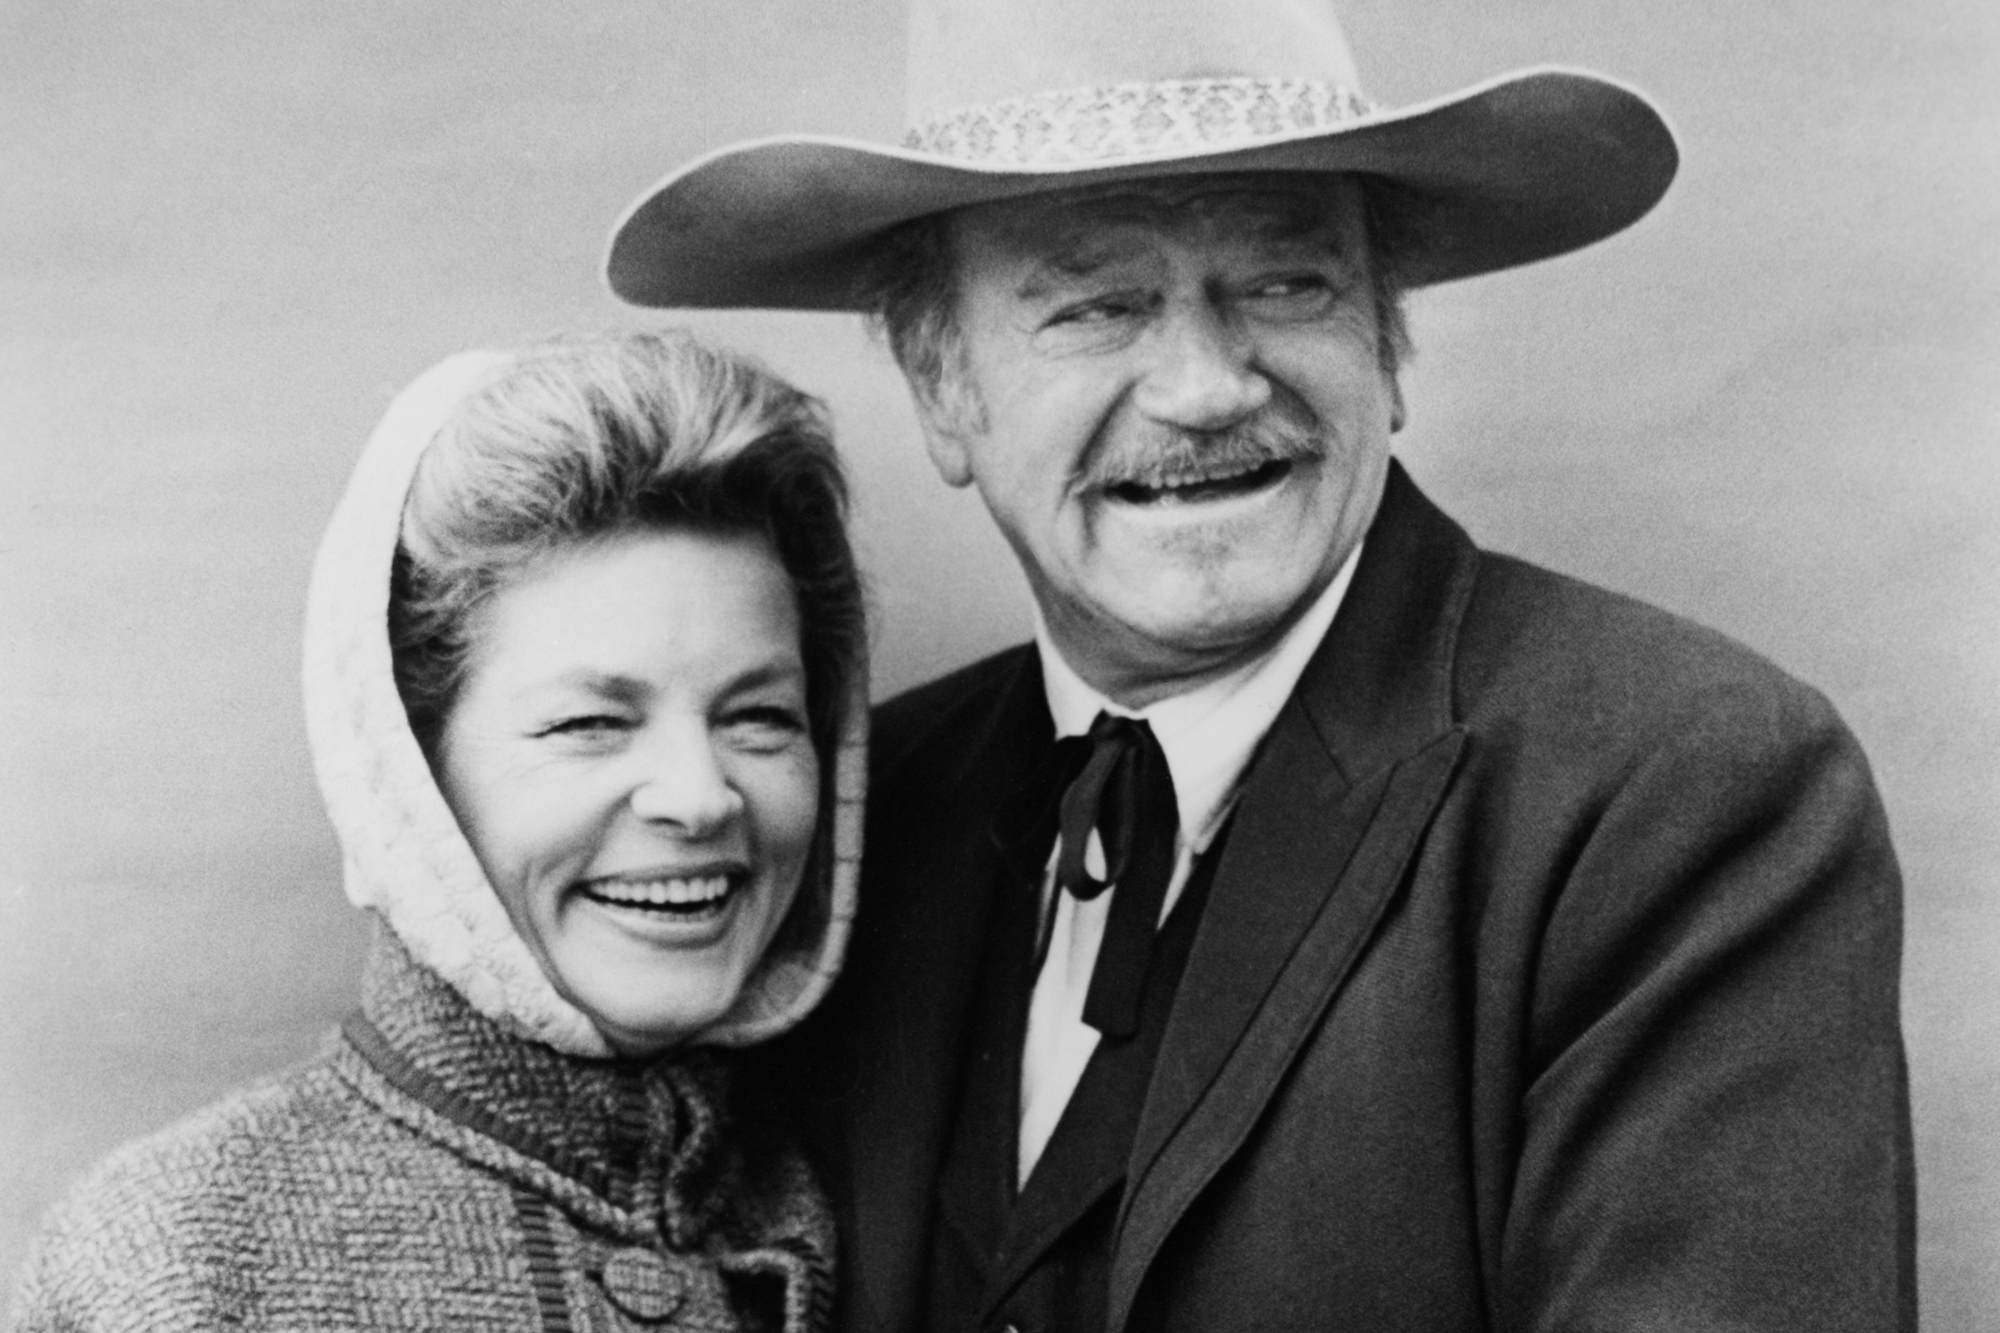 'The Shootist' Lauren Bacall as Bond Rogers and John Wayne as J.B. Books in a black-and-white picture, smiling next to each other in costume.